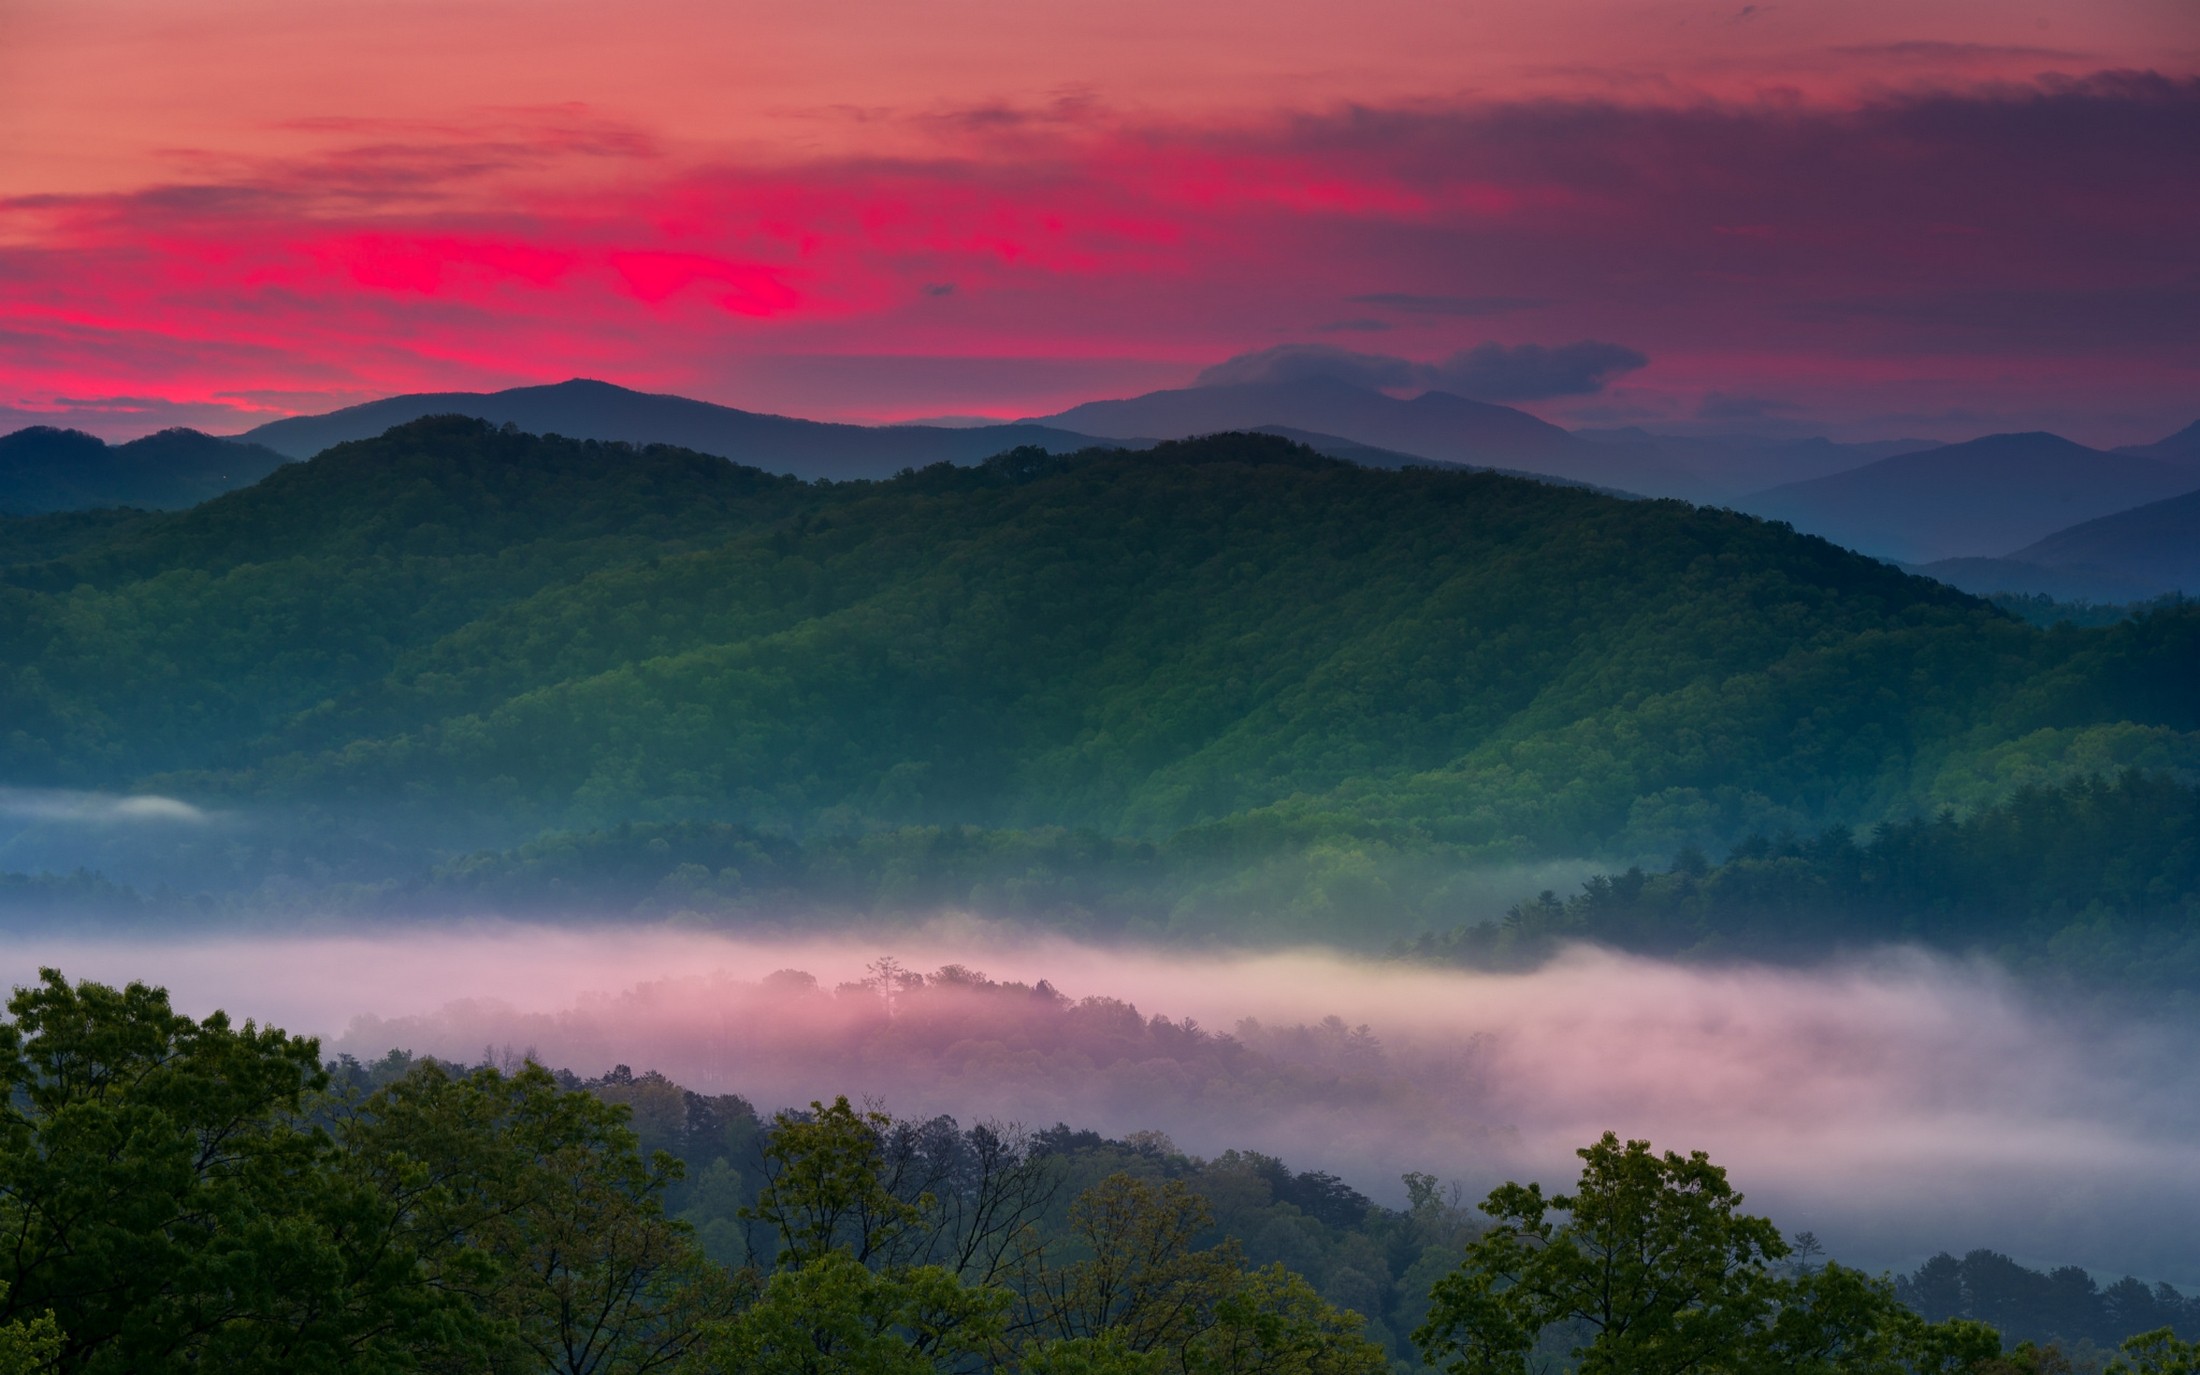 General 2200x1375 nature landscape spring mist valley mountains forest red sky trees clouds